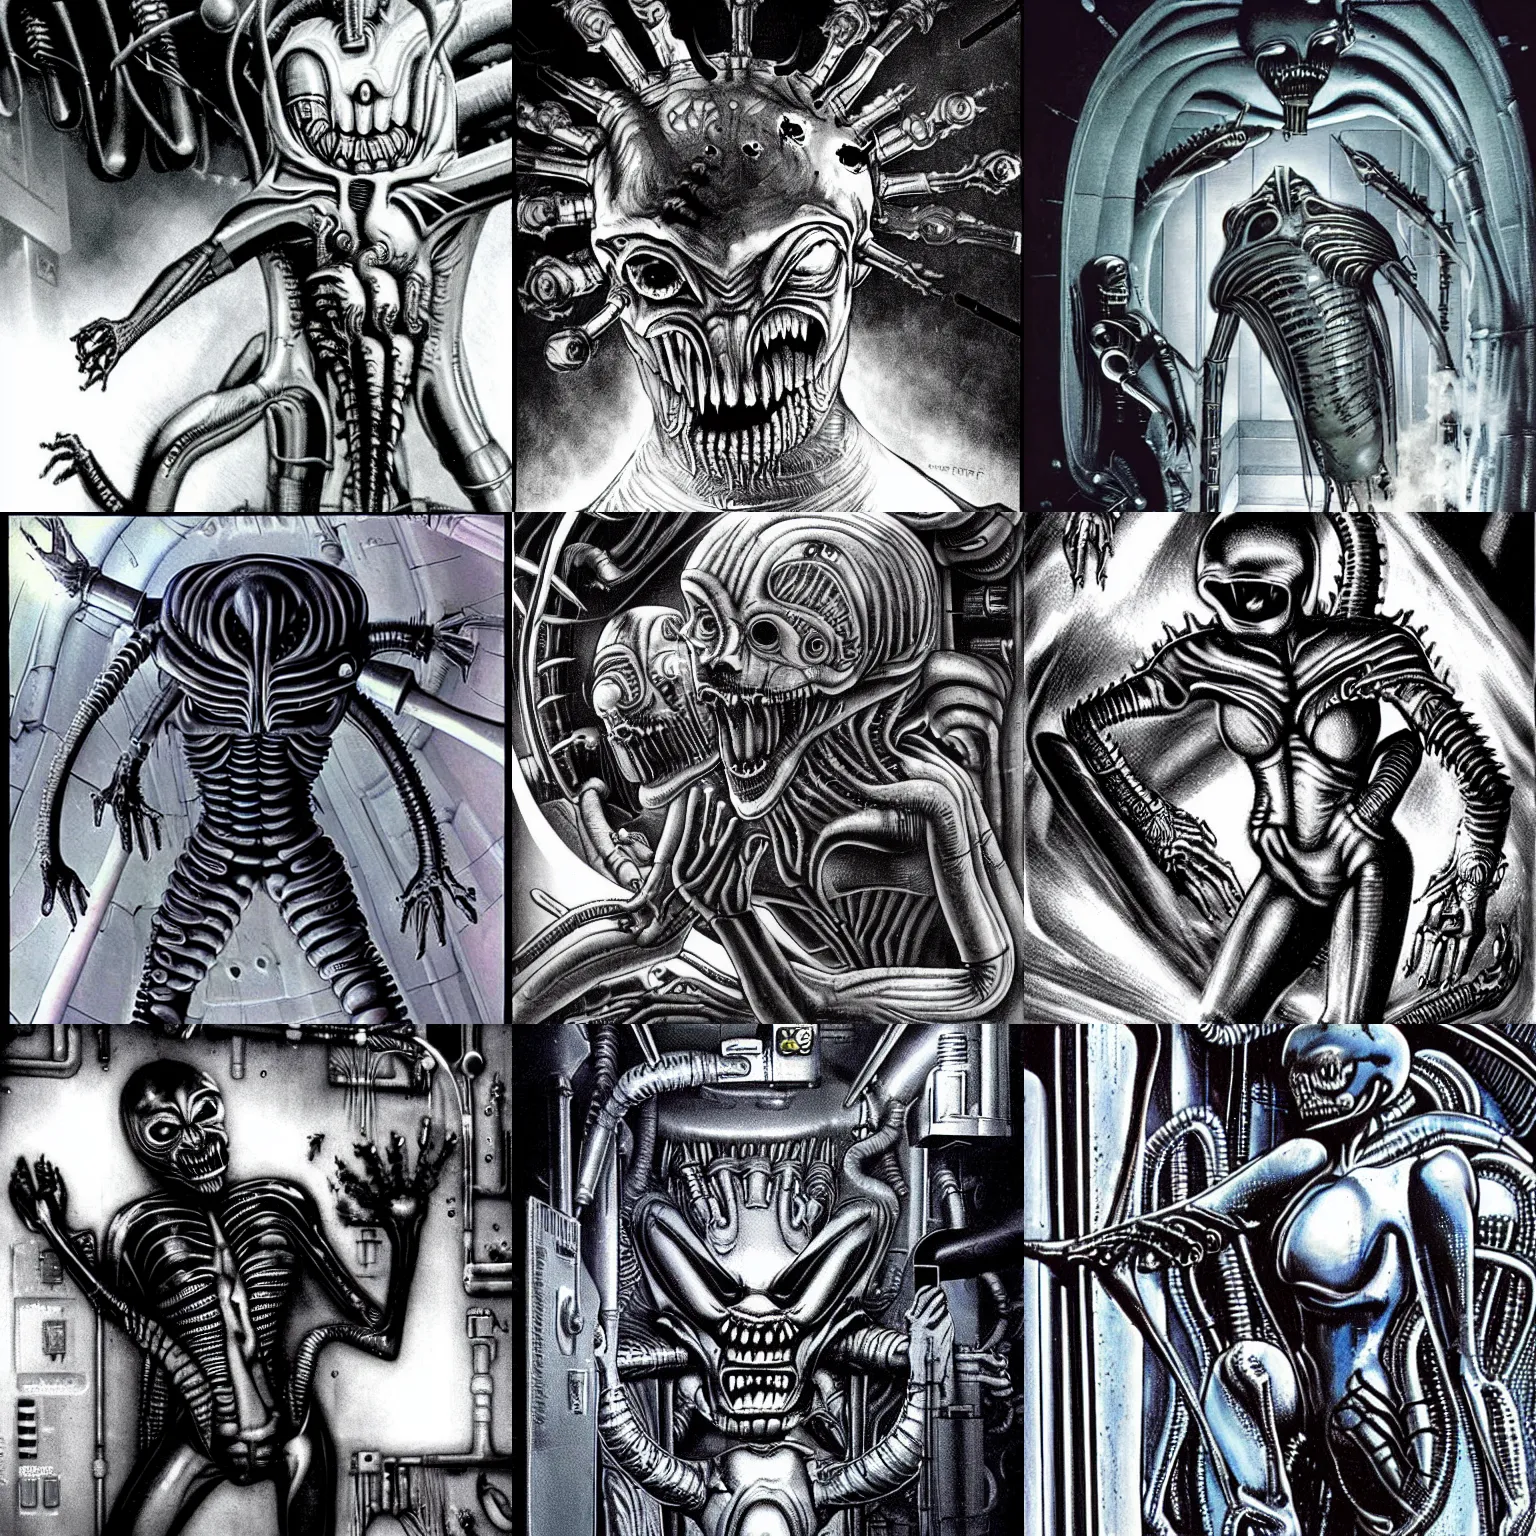 Prompt: giger alien queen breaking out of cryo and fighting scientists. Sci-fi horror.